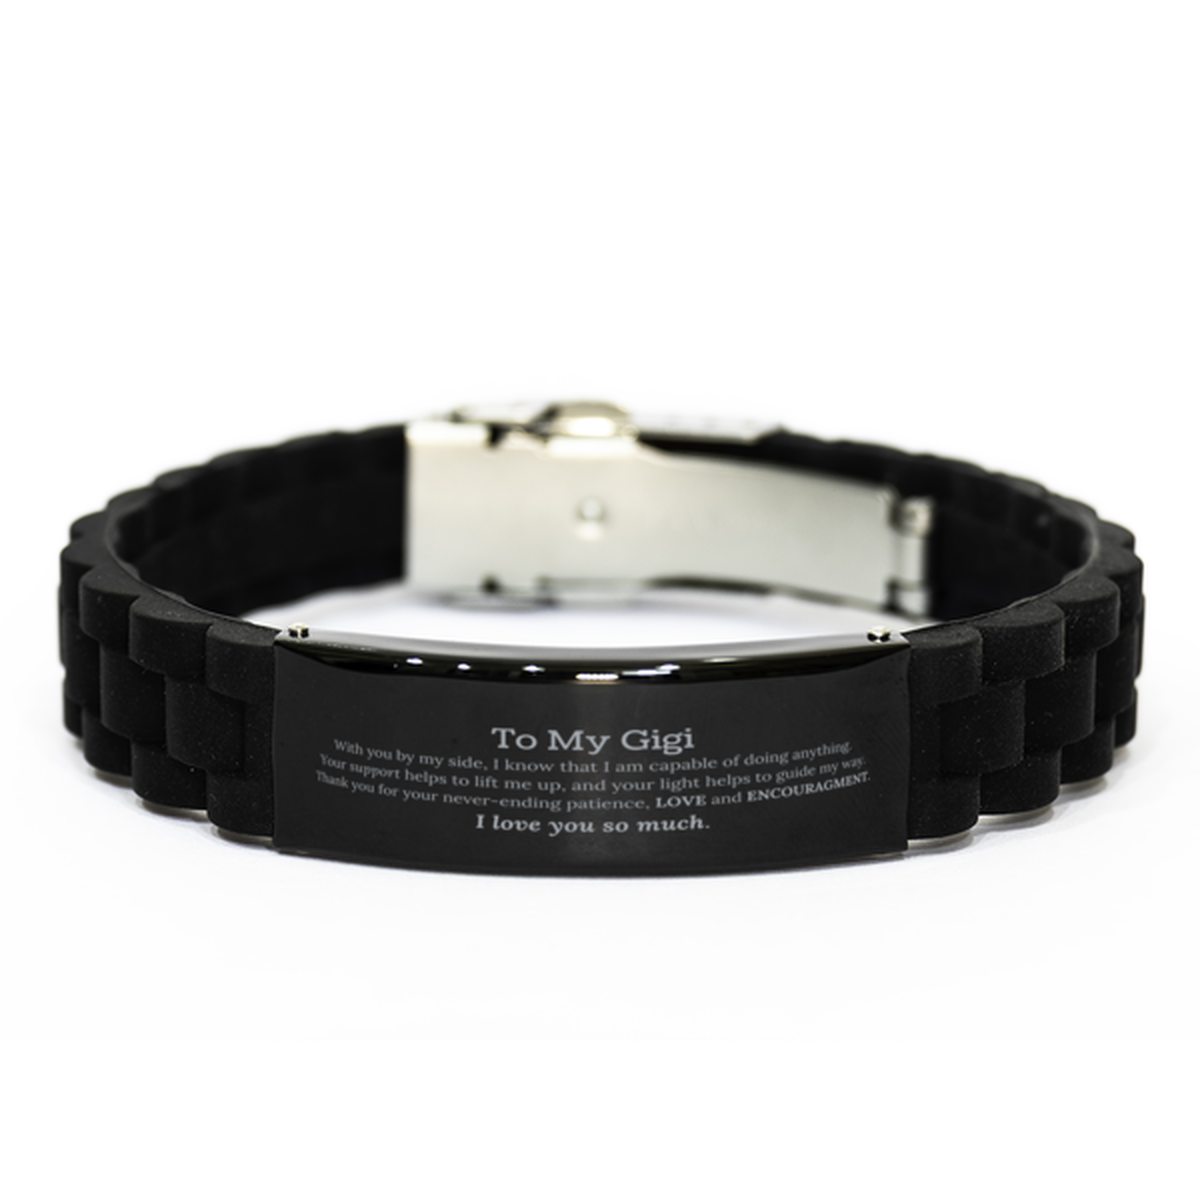 Appreciation Gigi Black Glidelock Clasp Bracelet Gifts, To My Gigi Birthday Christmas Wedding Keepsake Gifts for Gigi With you by my side, I know that I am capable of doing anything. I love you so much